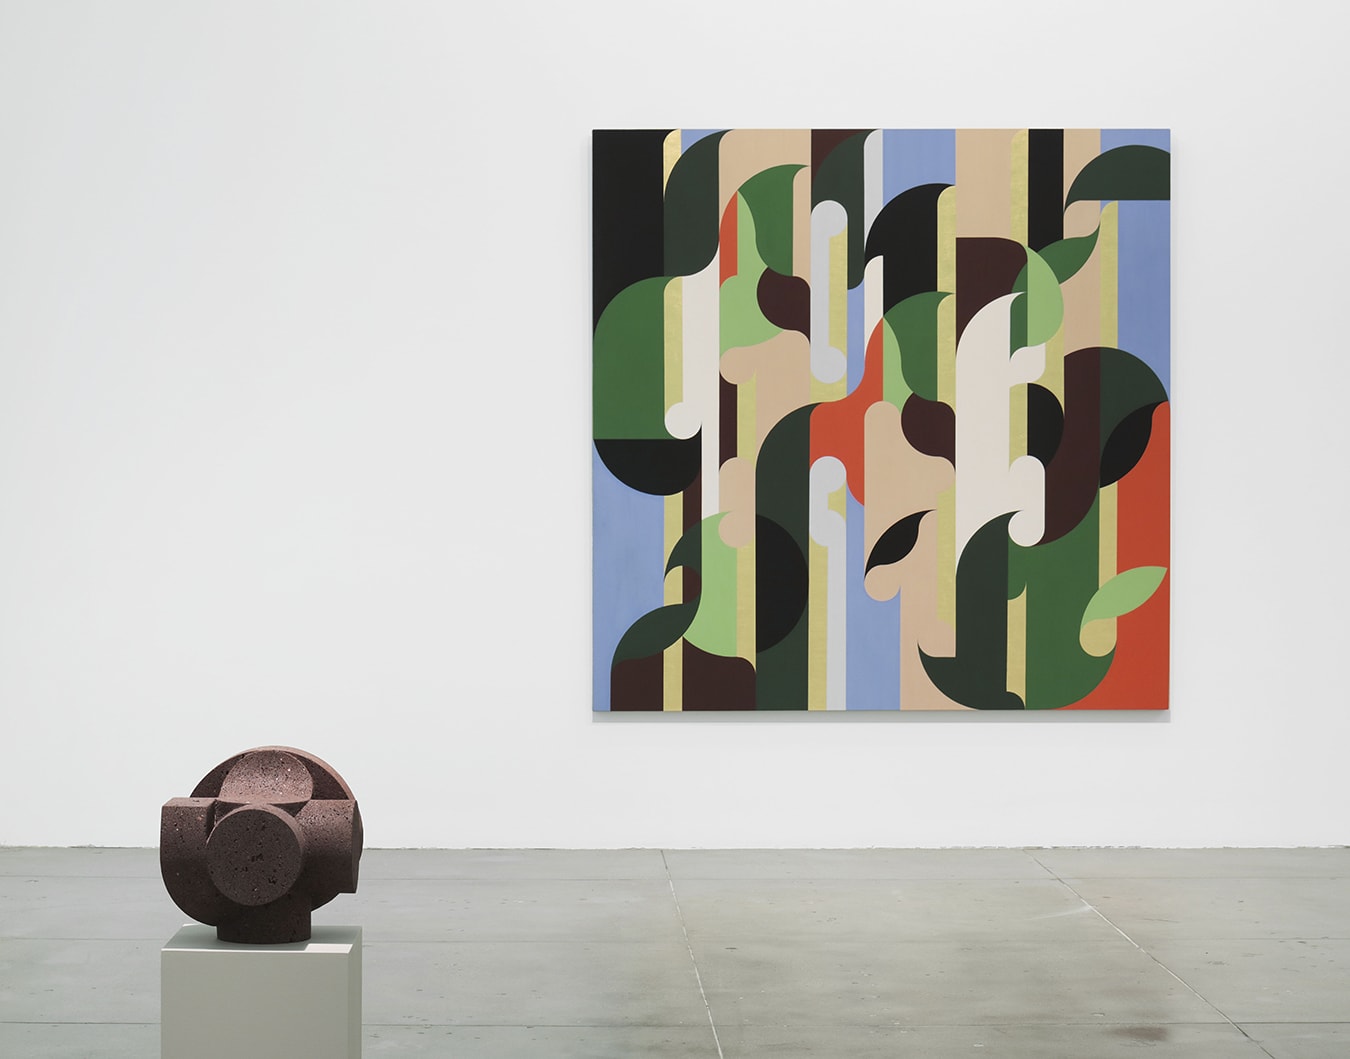 Installation view of a colorful graphically inspired painting on the right side of a white wall with a brown bronze circular sculpture on the floor